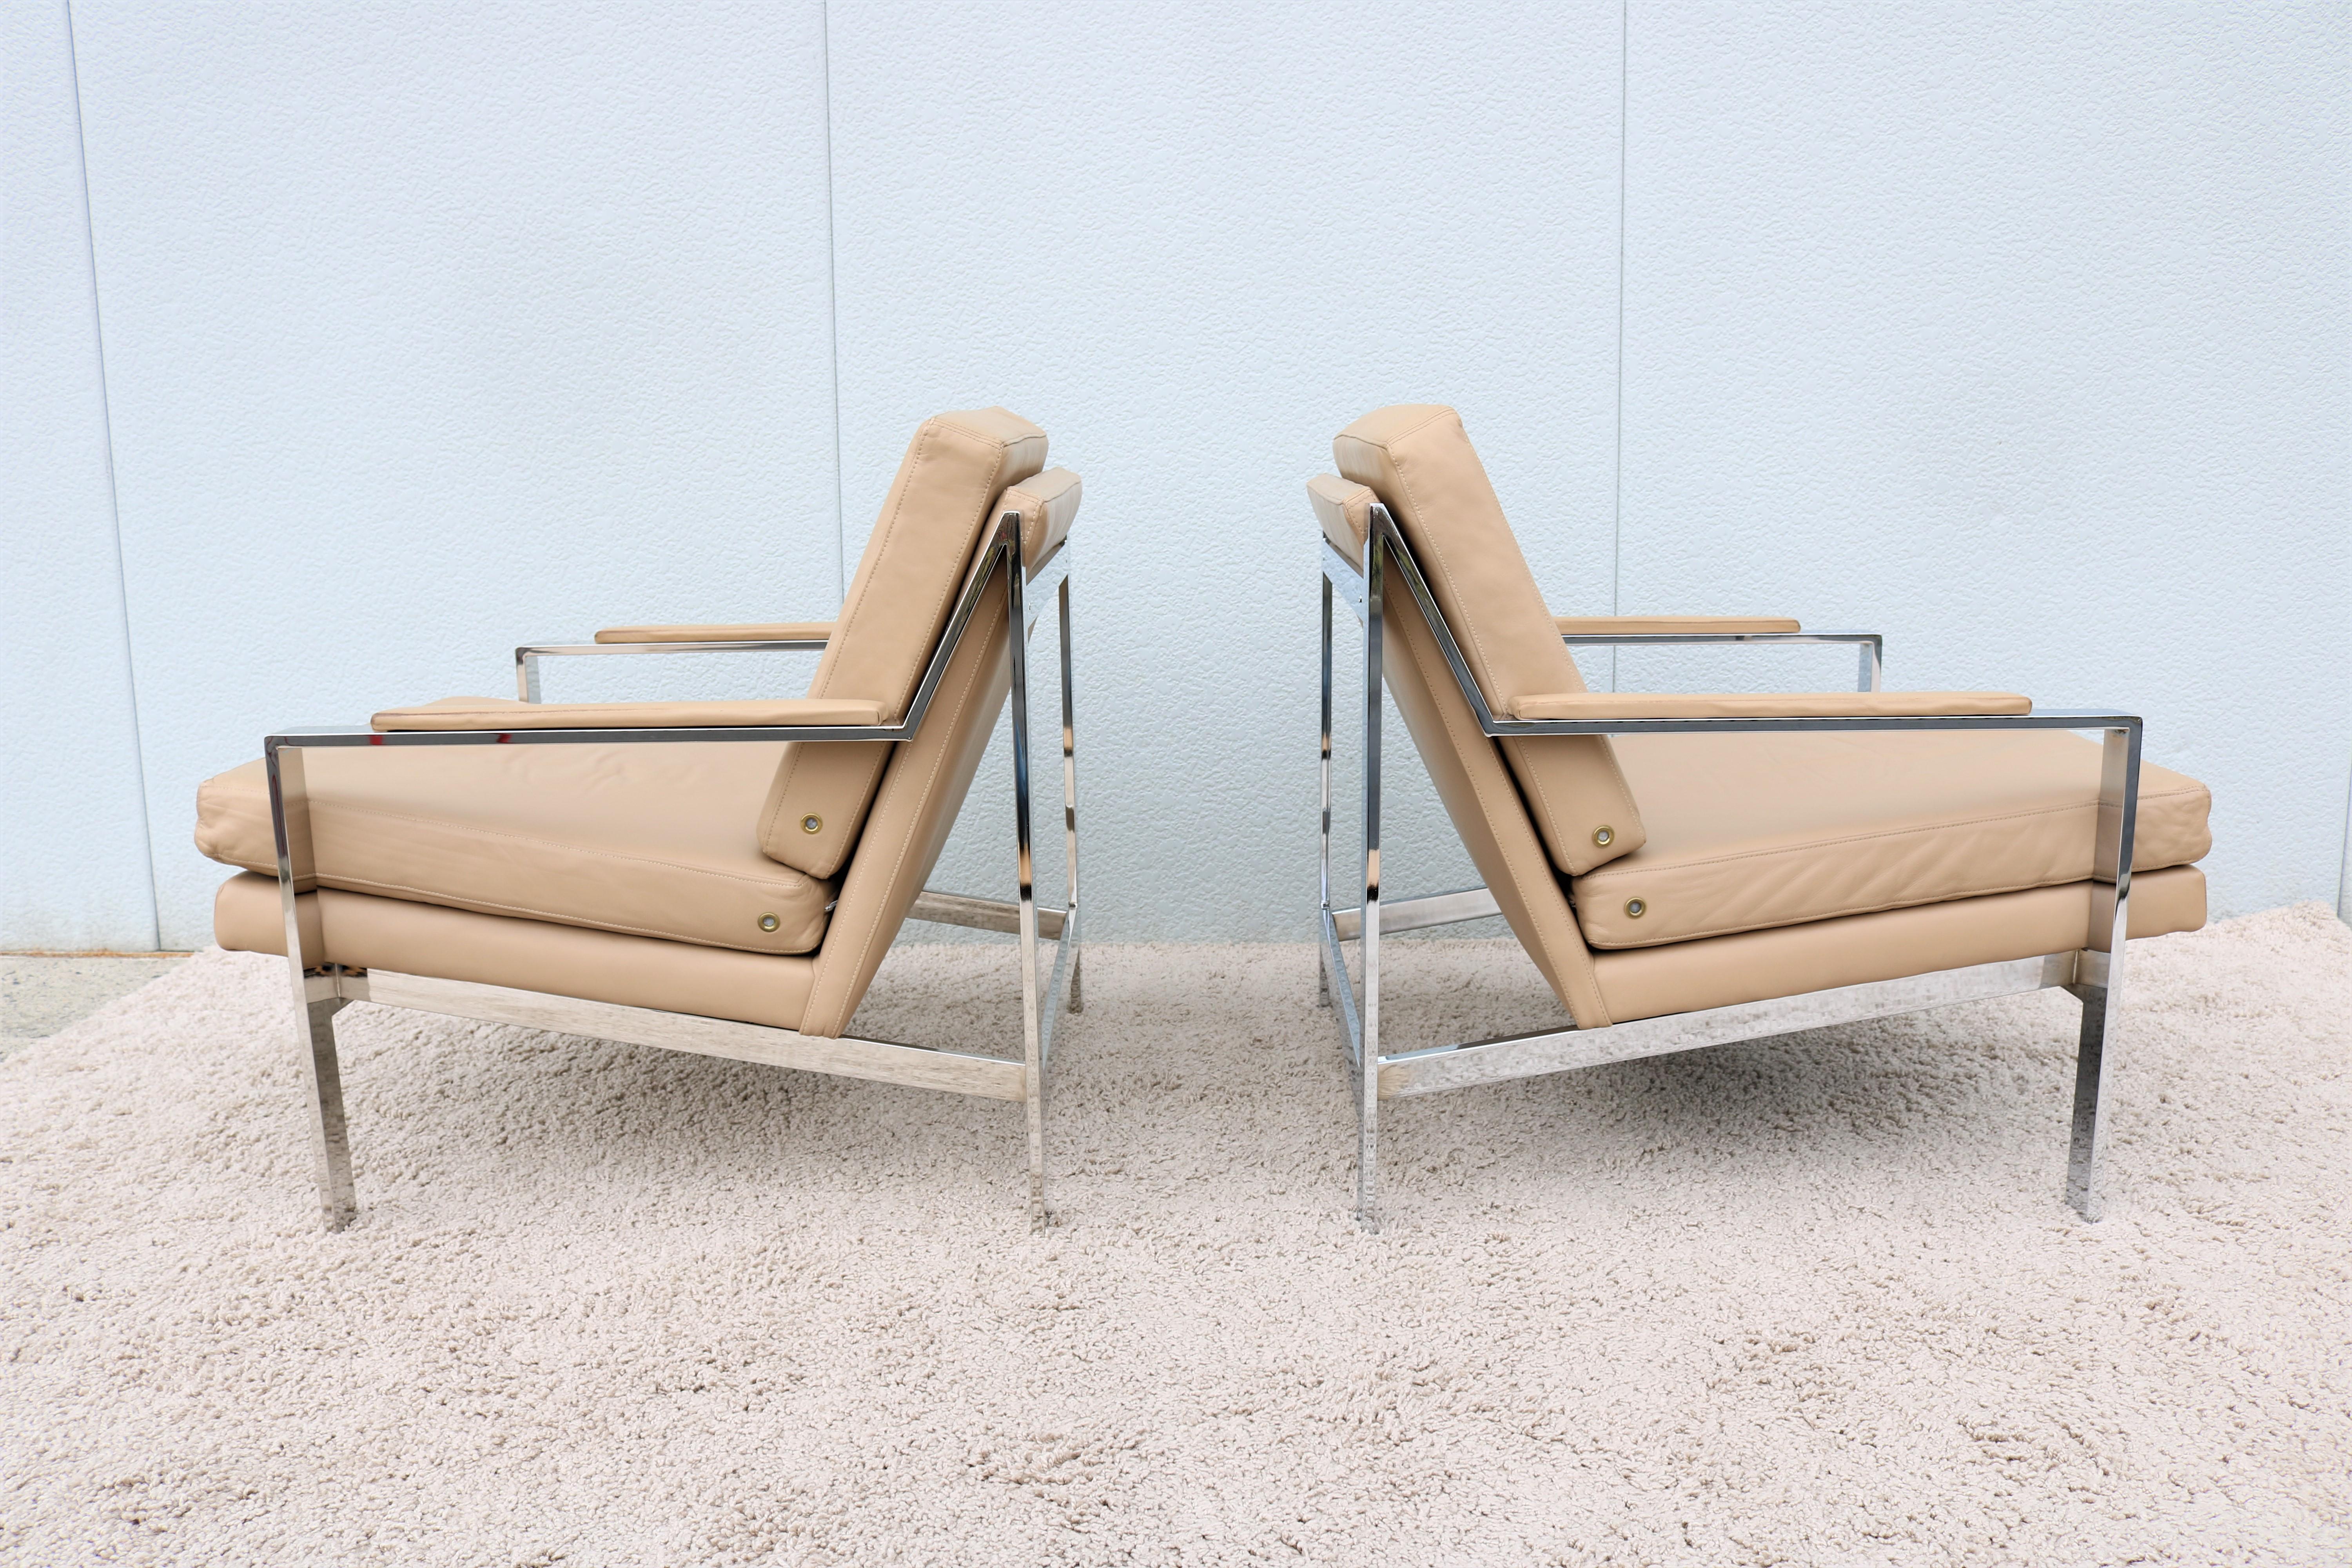 Vintage Cy Mann Leather and Chrome Lounge Chairs in Milo Baughman Style, a Pair For Sale 2